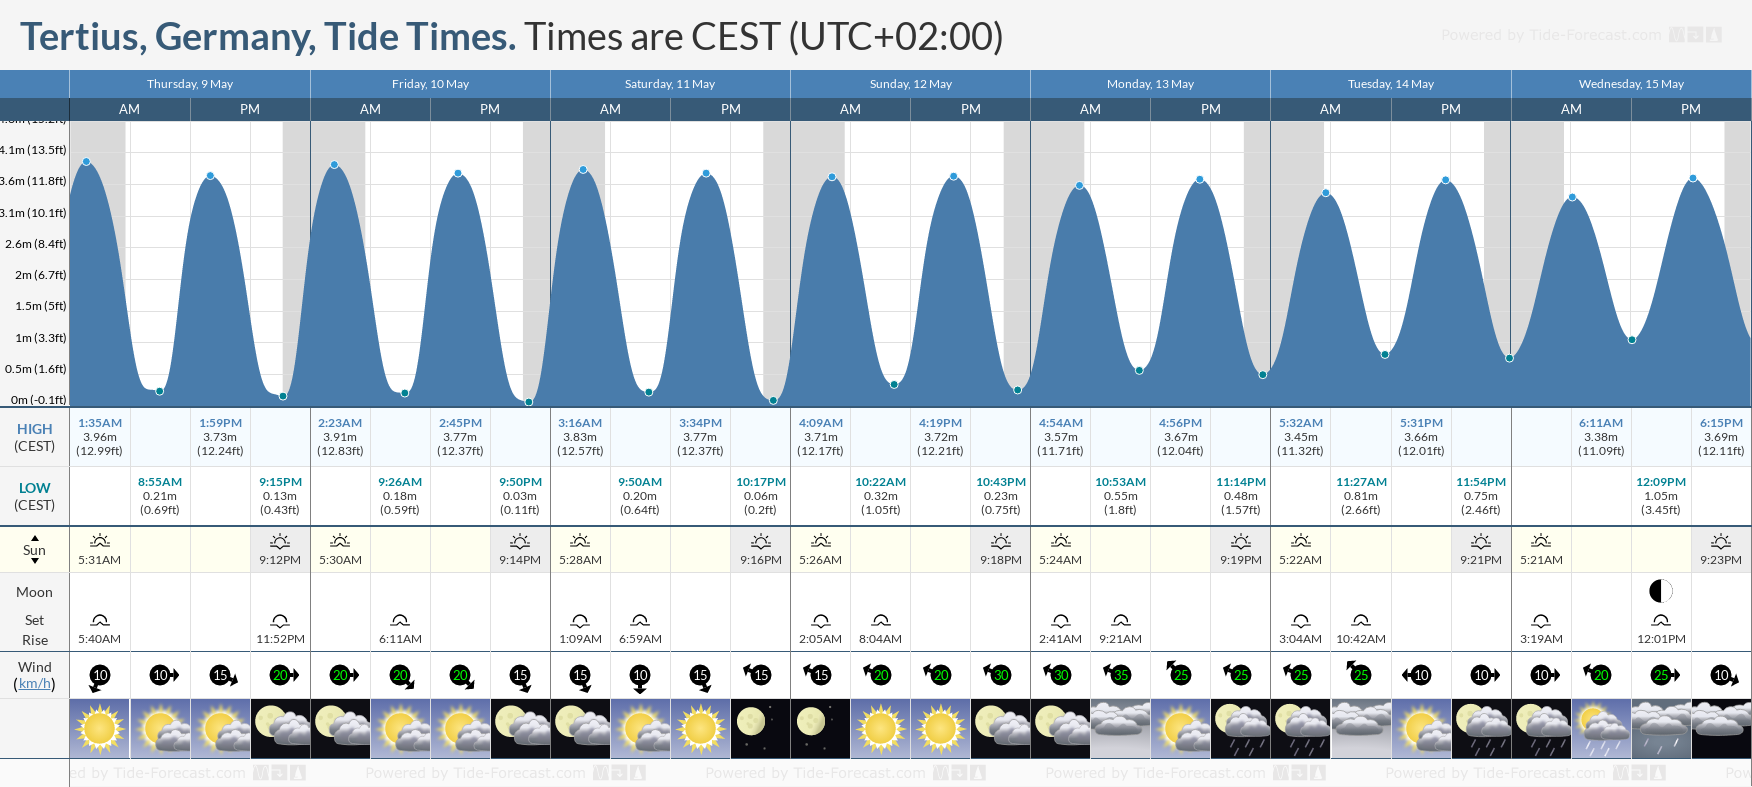 Tertius, Germany Tide Chart including high and low tide tide times for the next 7 days